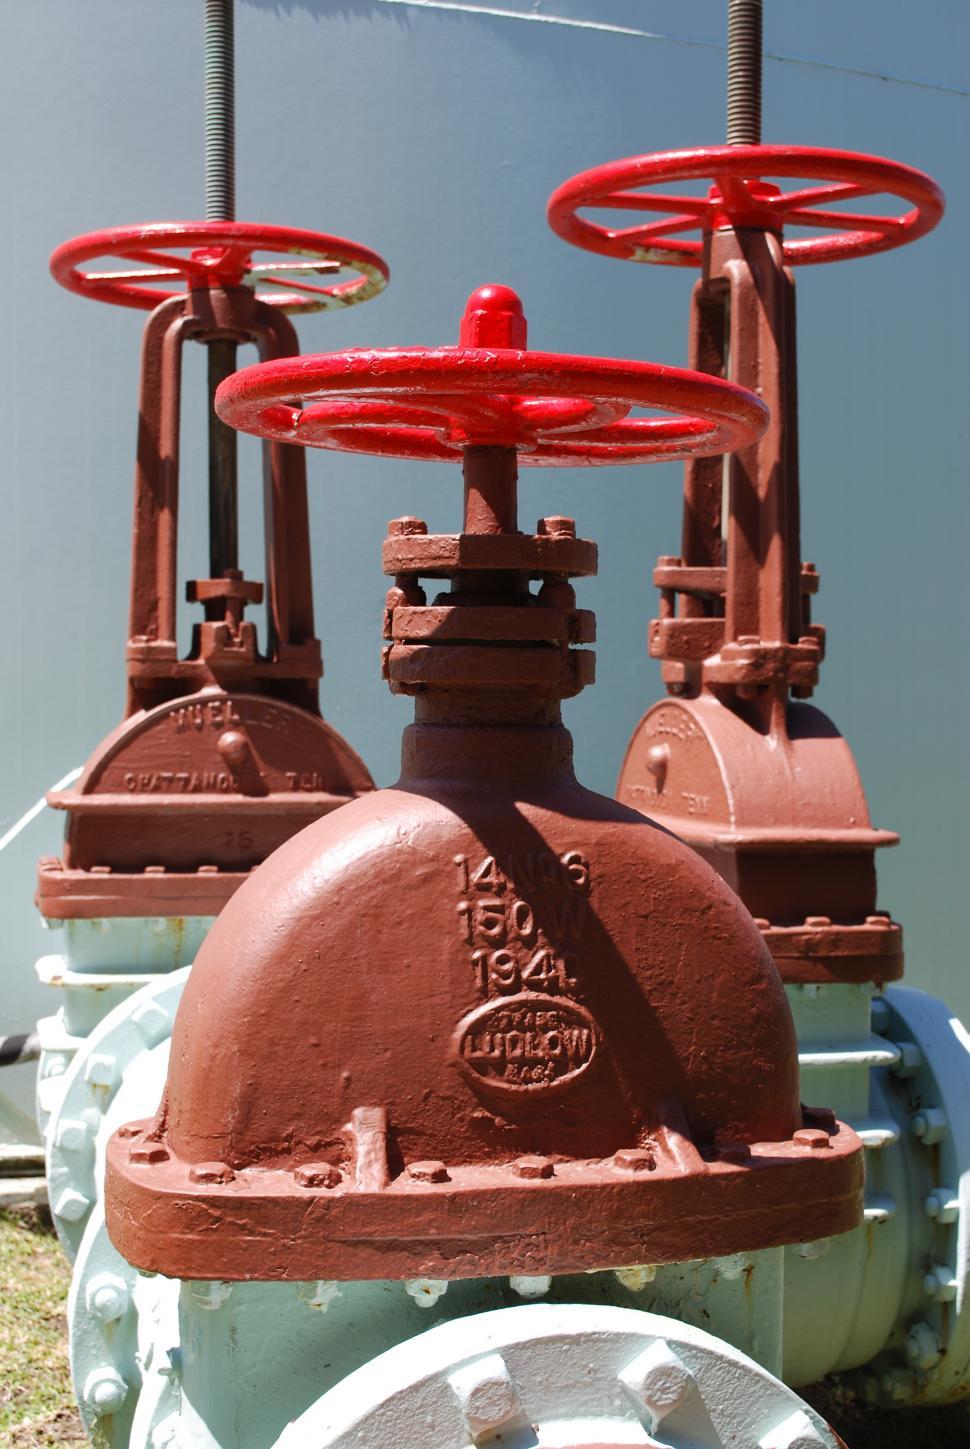 Free Image of Commercial Water Valves 